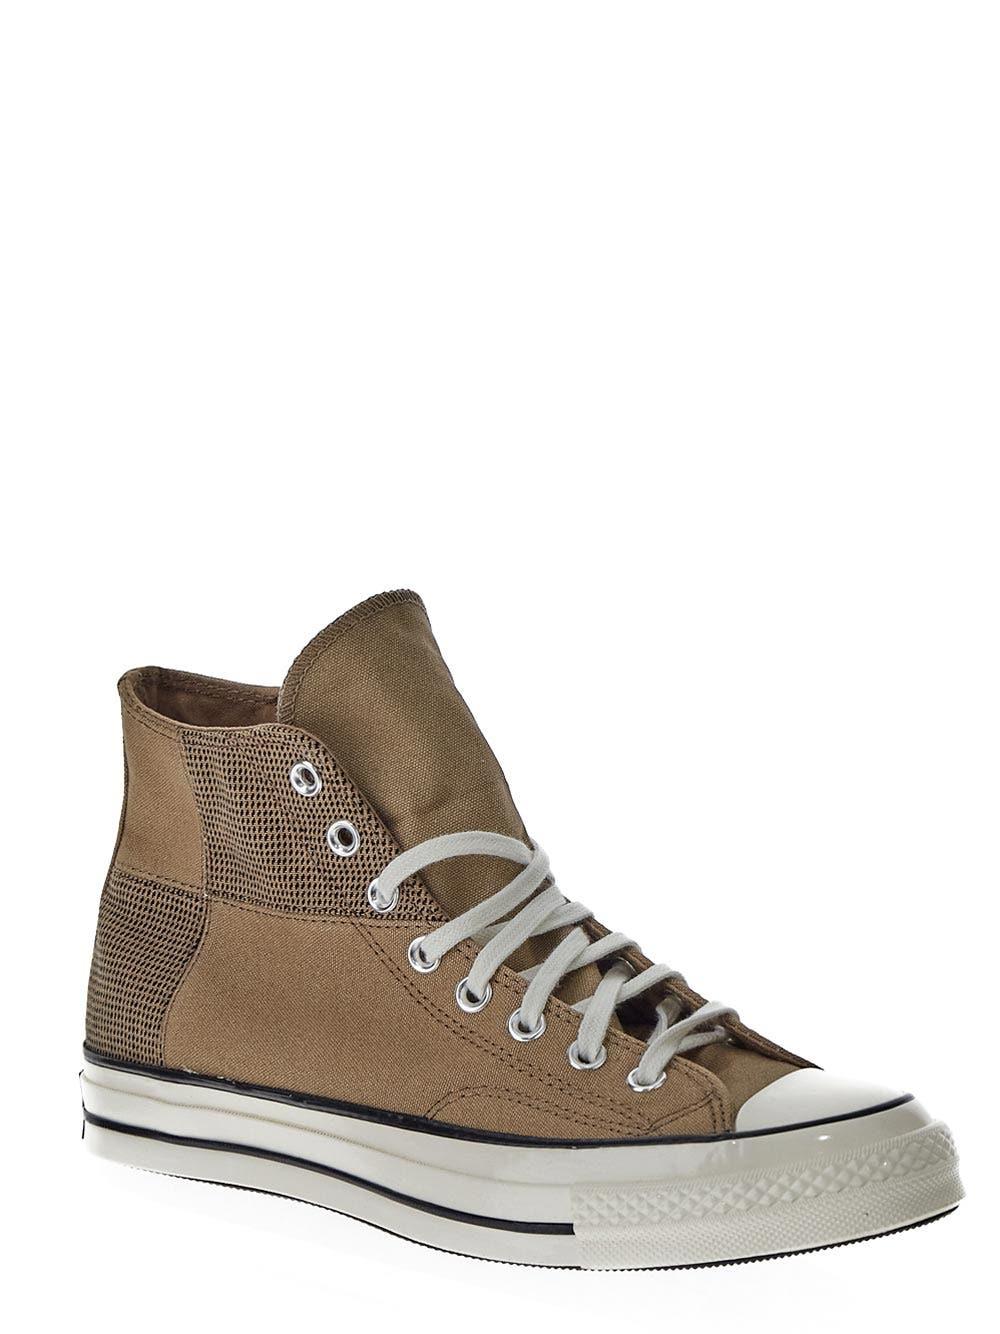 Converse Chuck 70 Patchwork Sneaker in Brown | Lyst